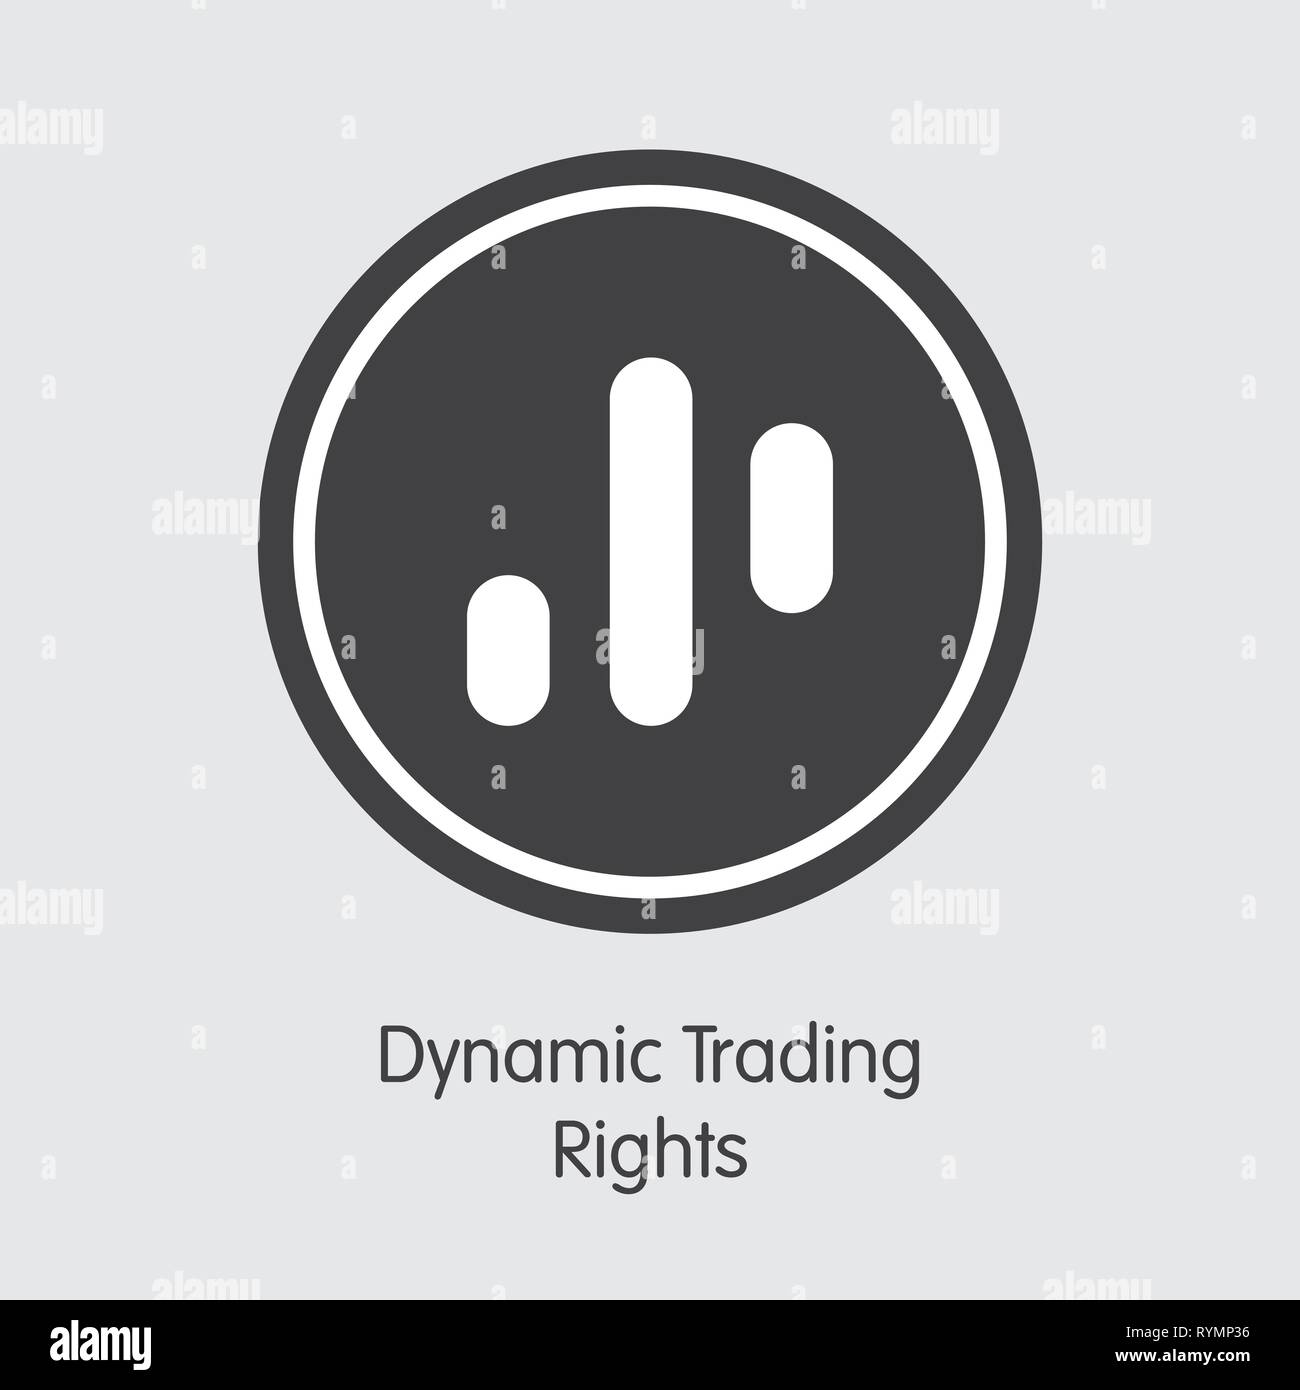 DTR - Dynamic Trading Rights - The Coin Icon. Stock Vector